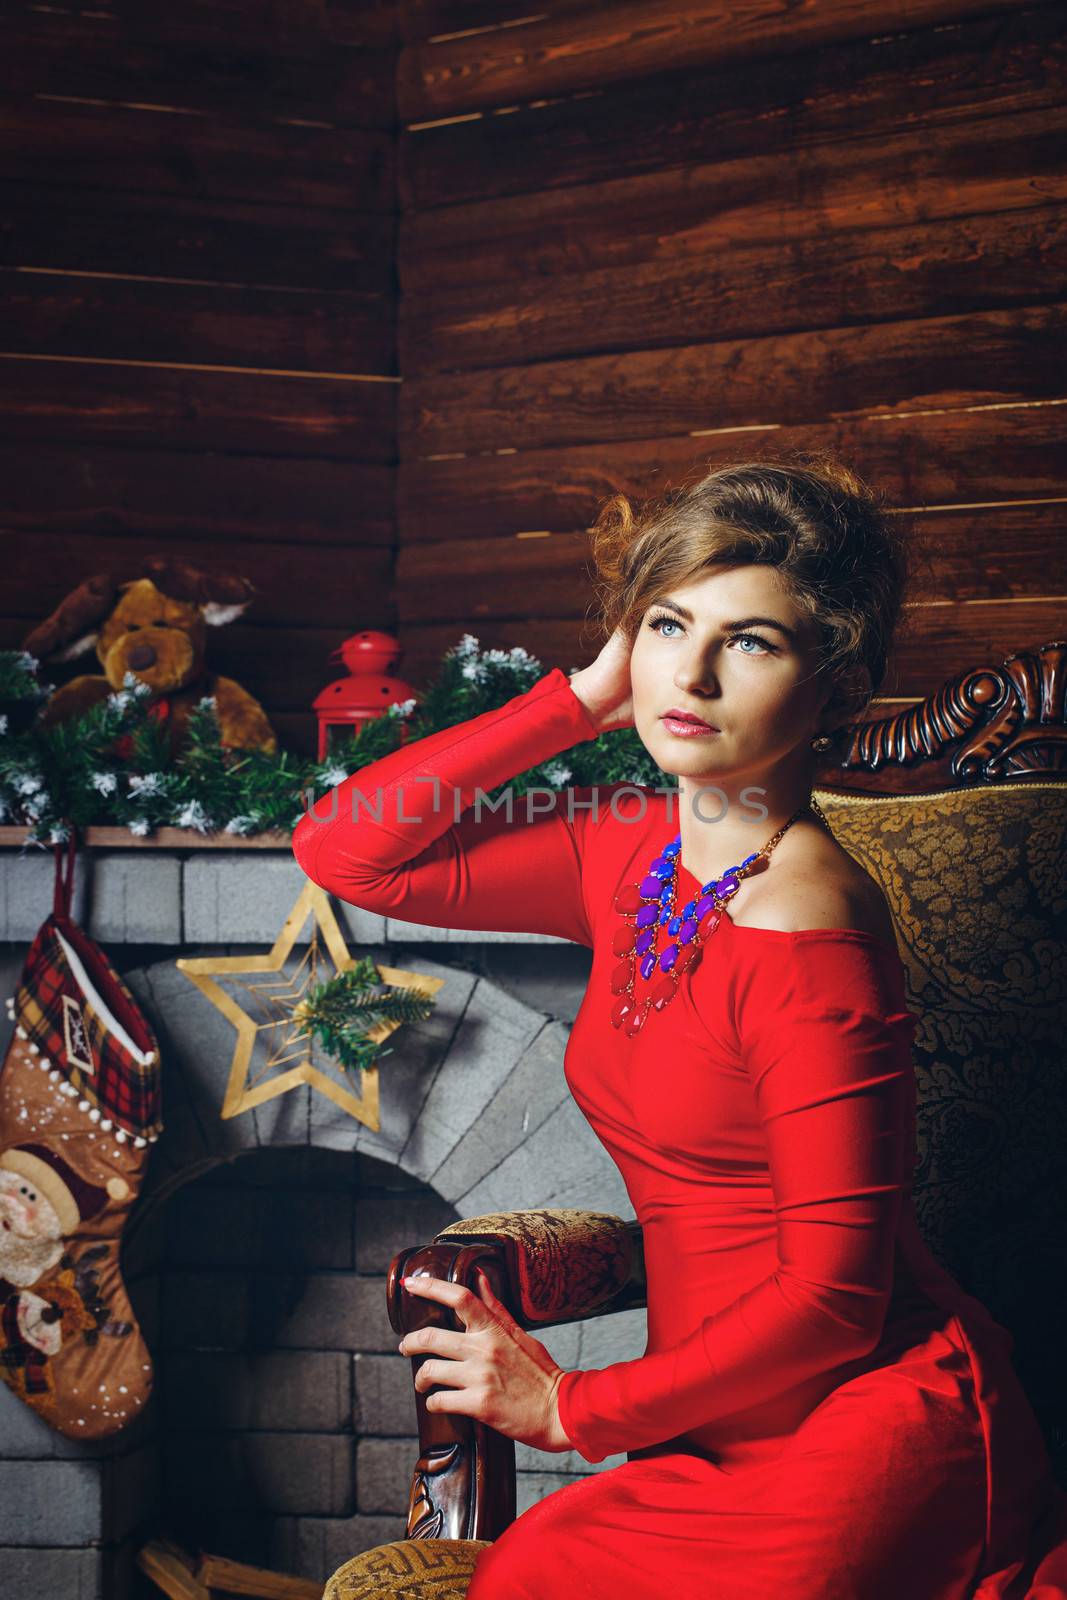 Attractive young girl in red dress sitting in armchair near fireplaces Christmas